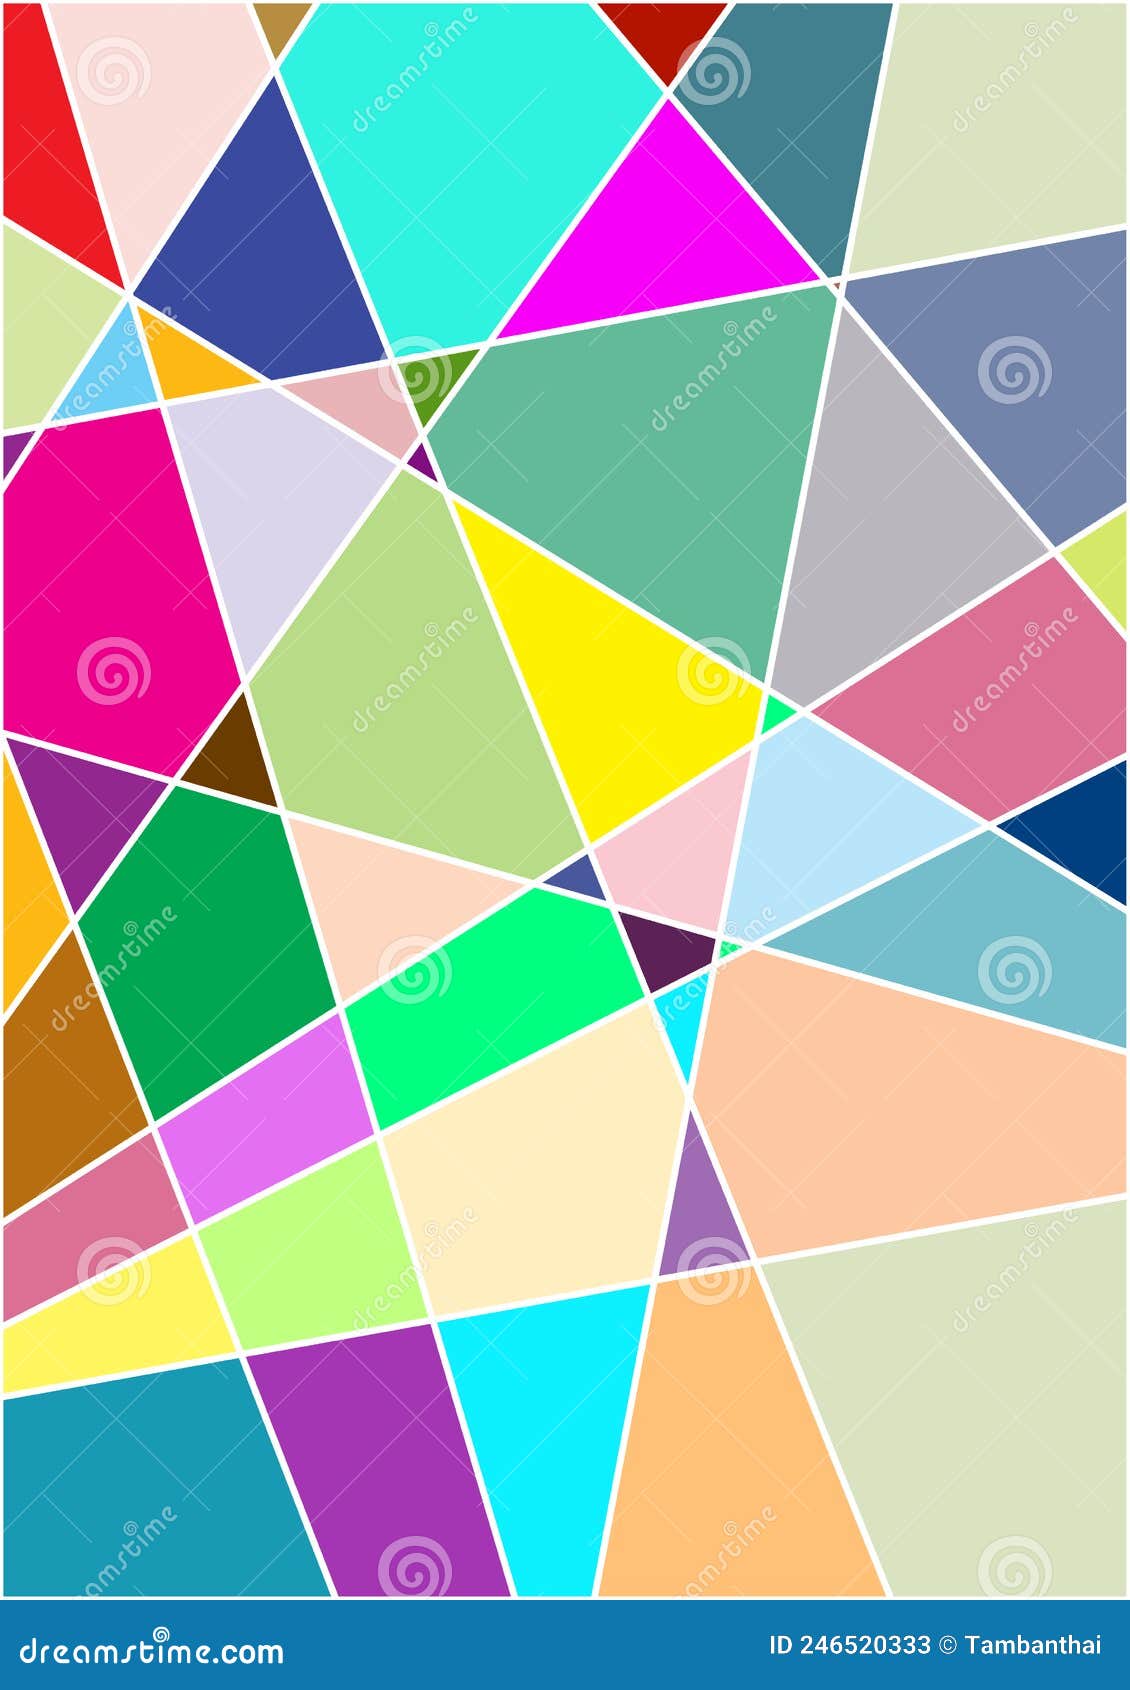 Abstract Background with Colorful Shapes Separated by White